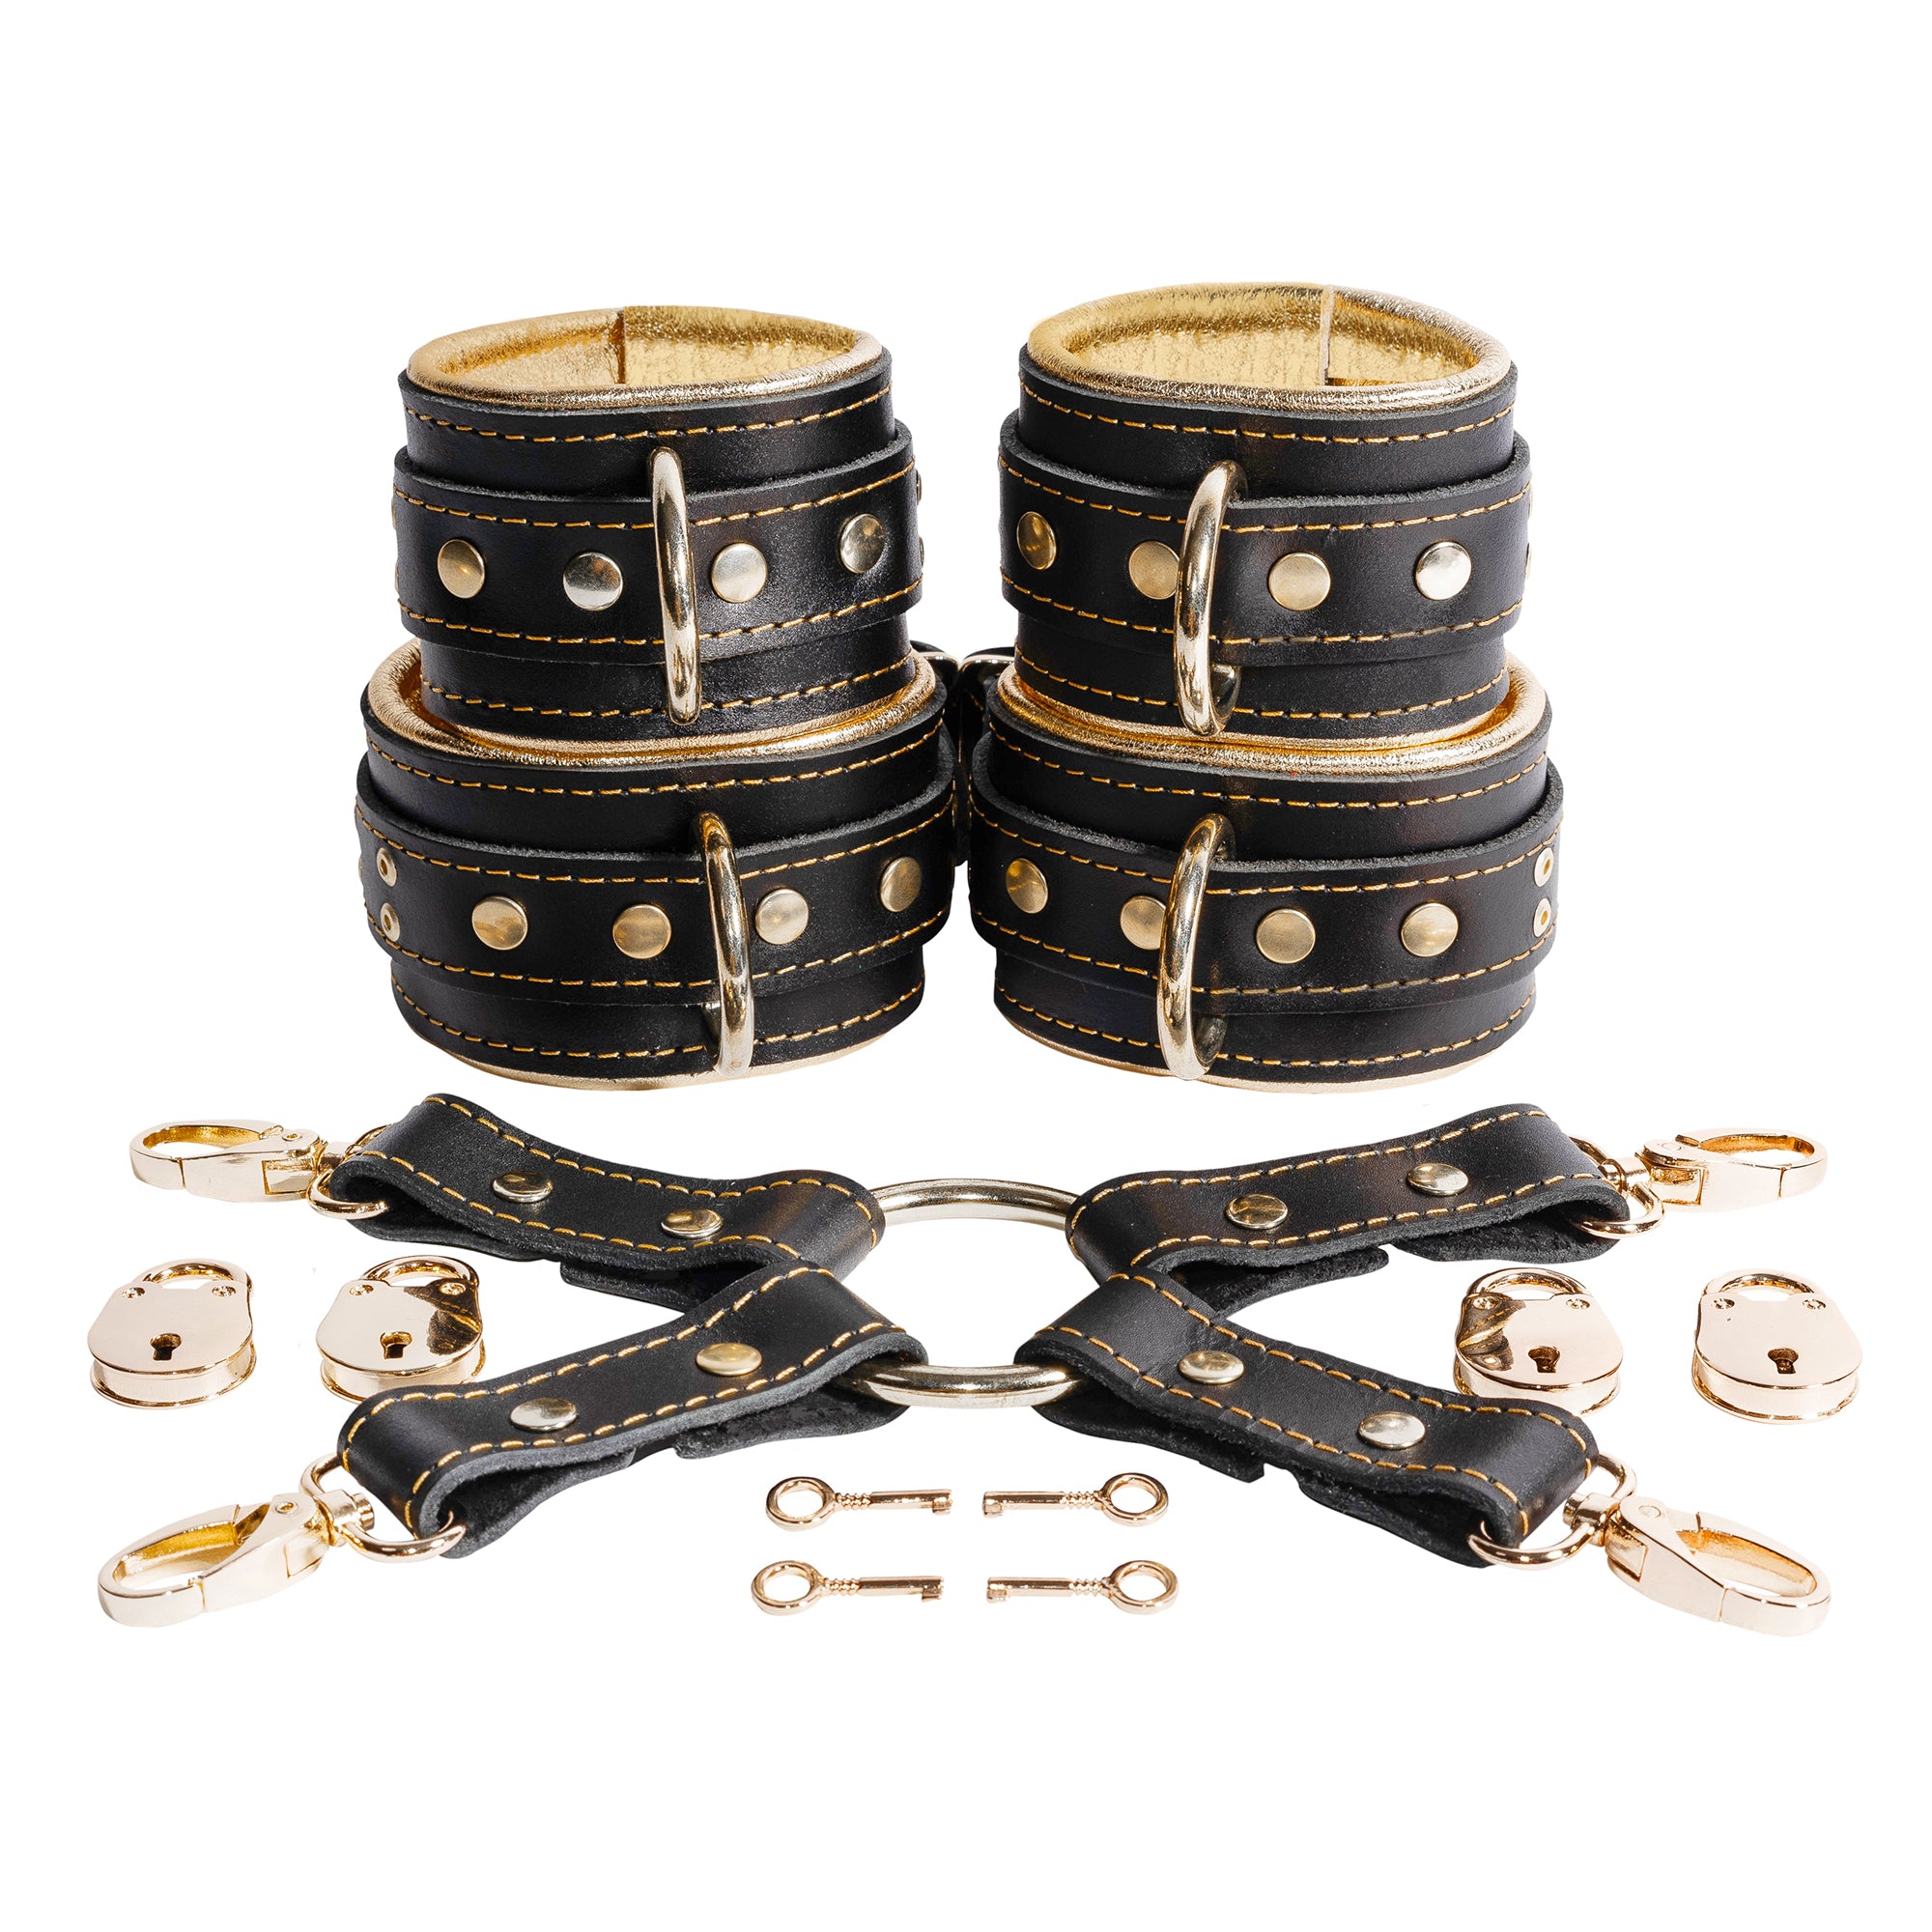 Theodora Luxury Kit Combination Wrist and Ankle Cuff Restraints with 4-way Hogtie